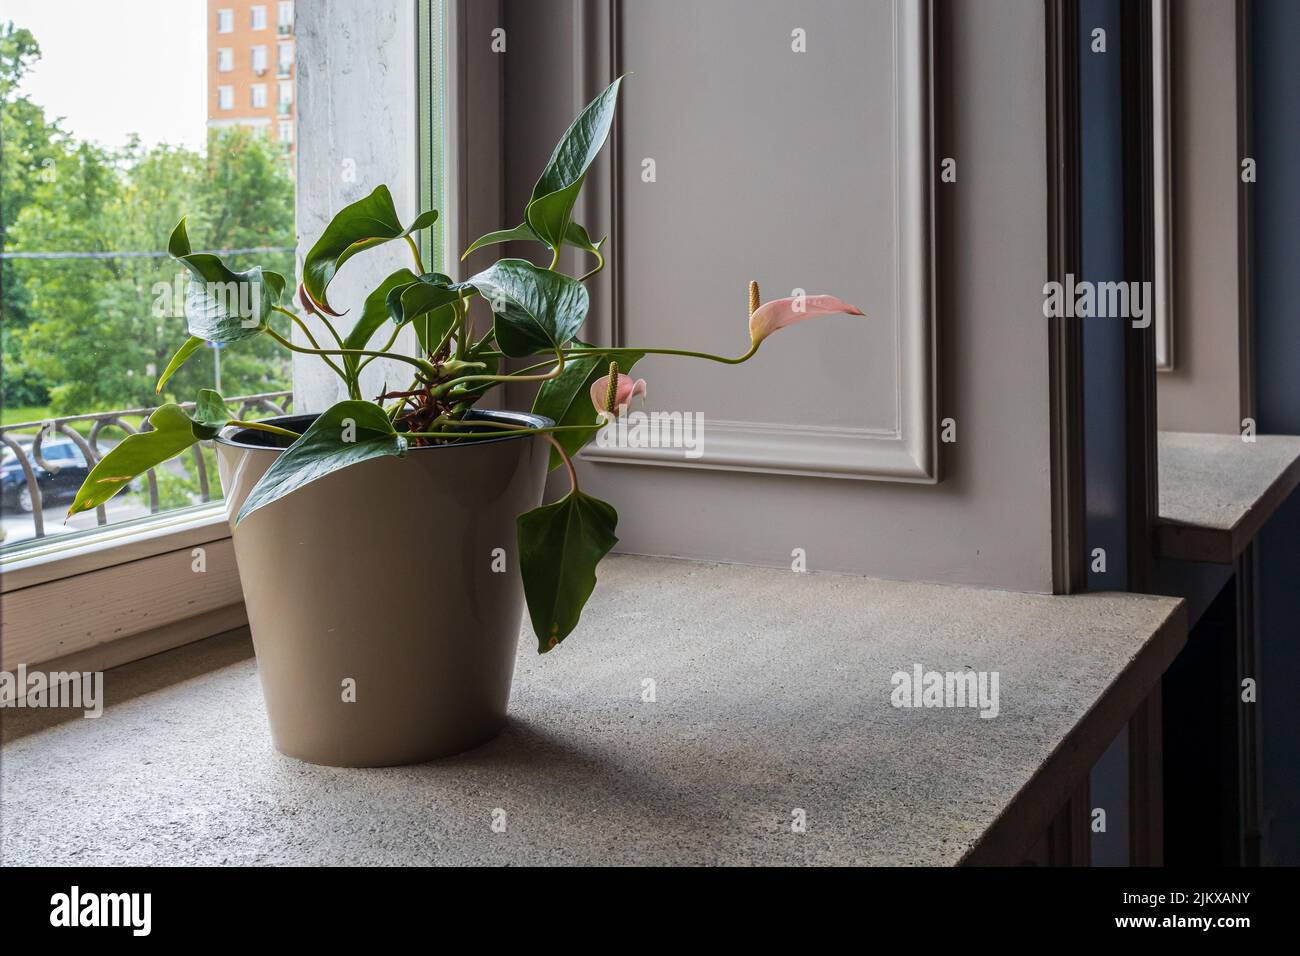 Anthurium in a ceramic pot on a wide stone window sill in a stylish interior Stock Photo